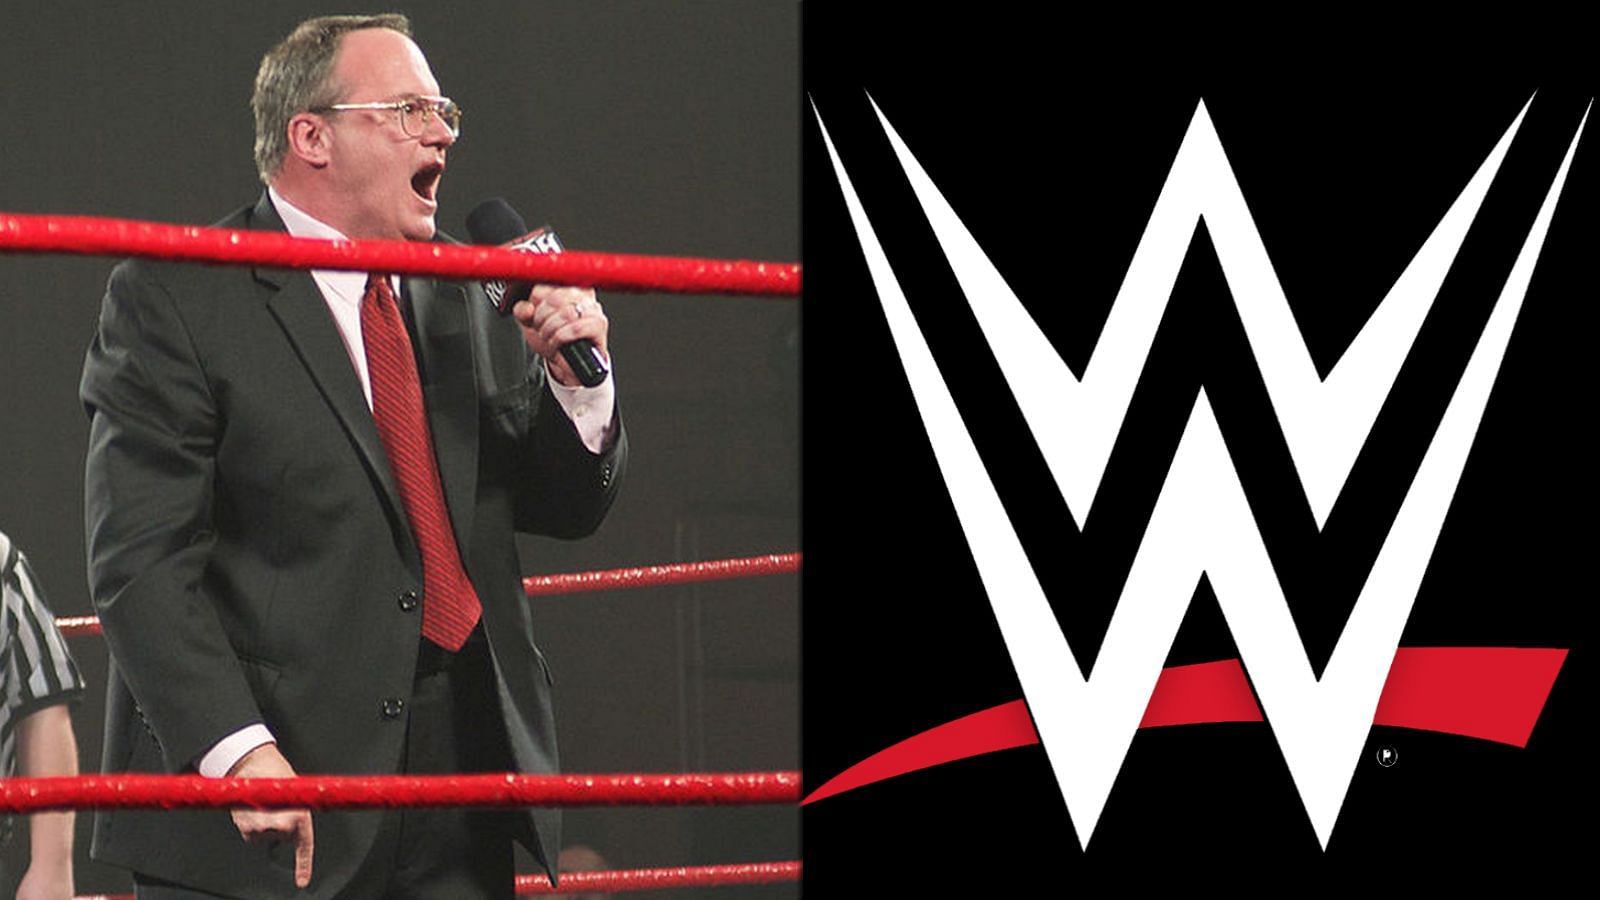 Cornette worked with WWE for over 10 years.